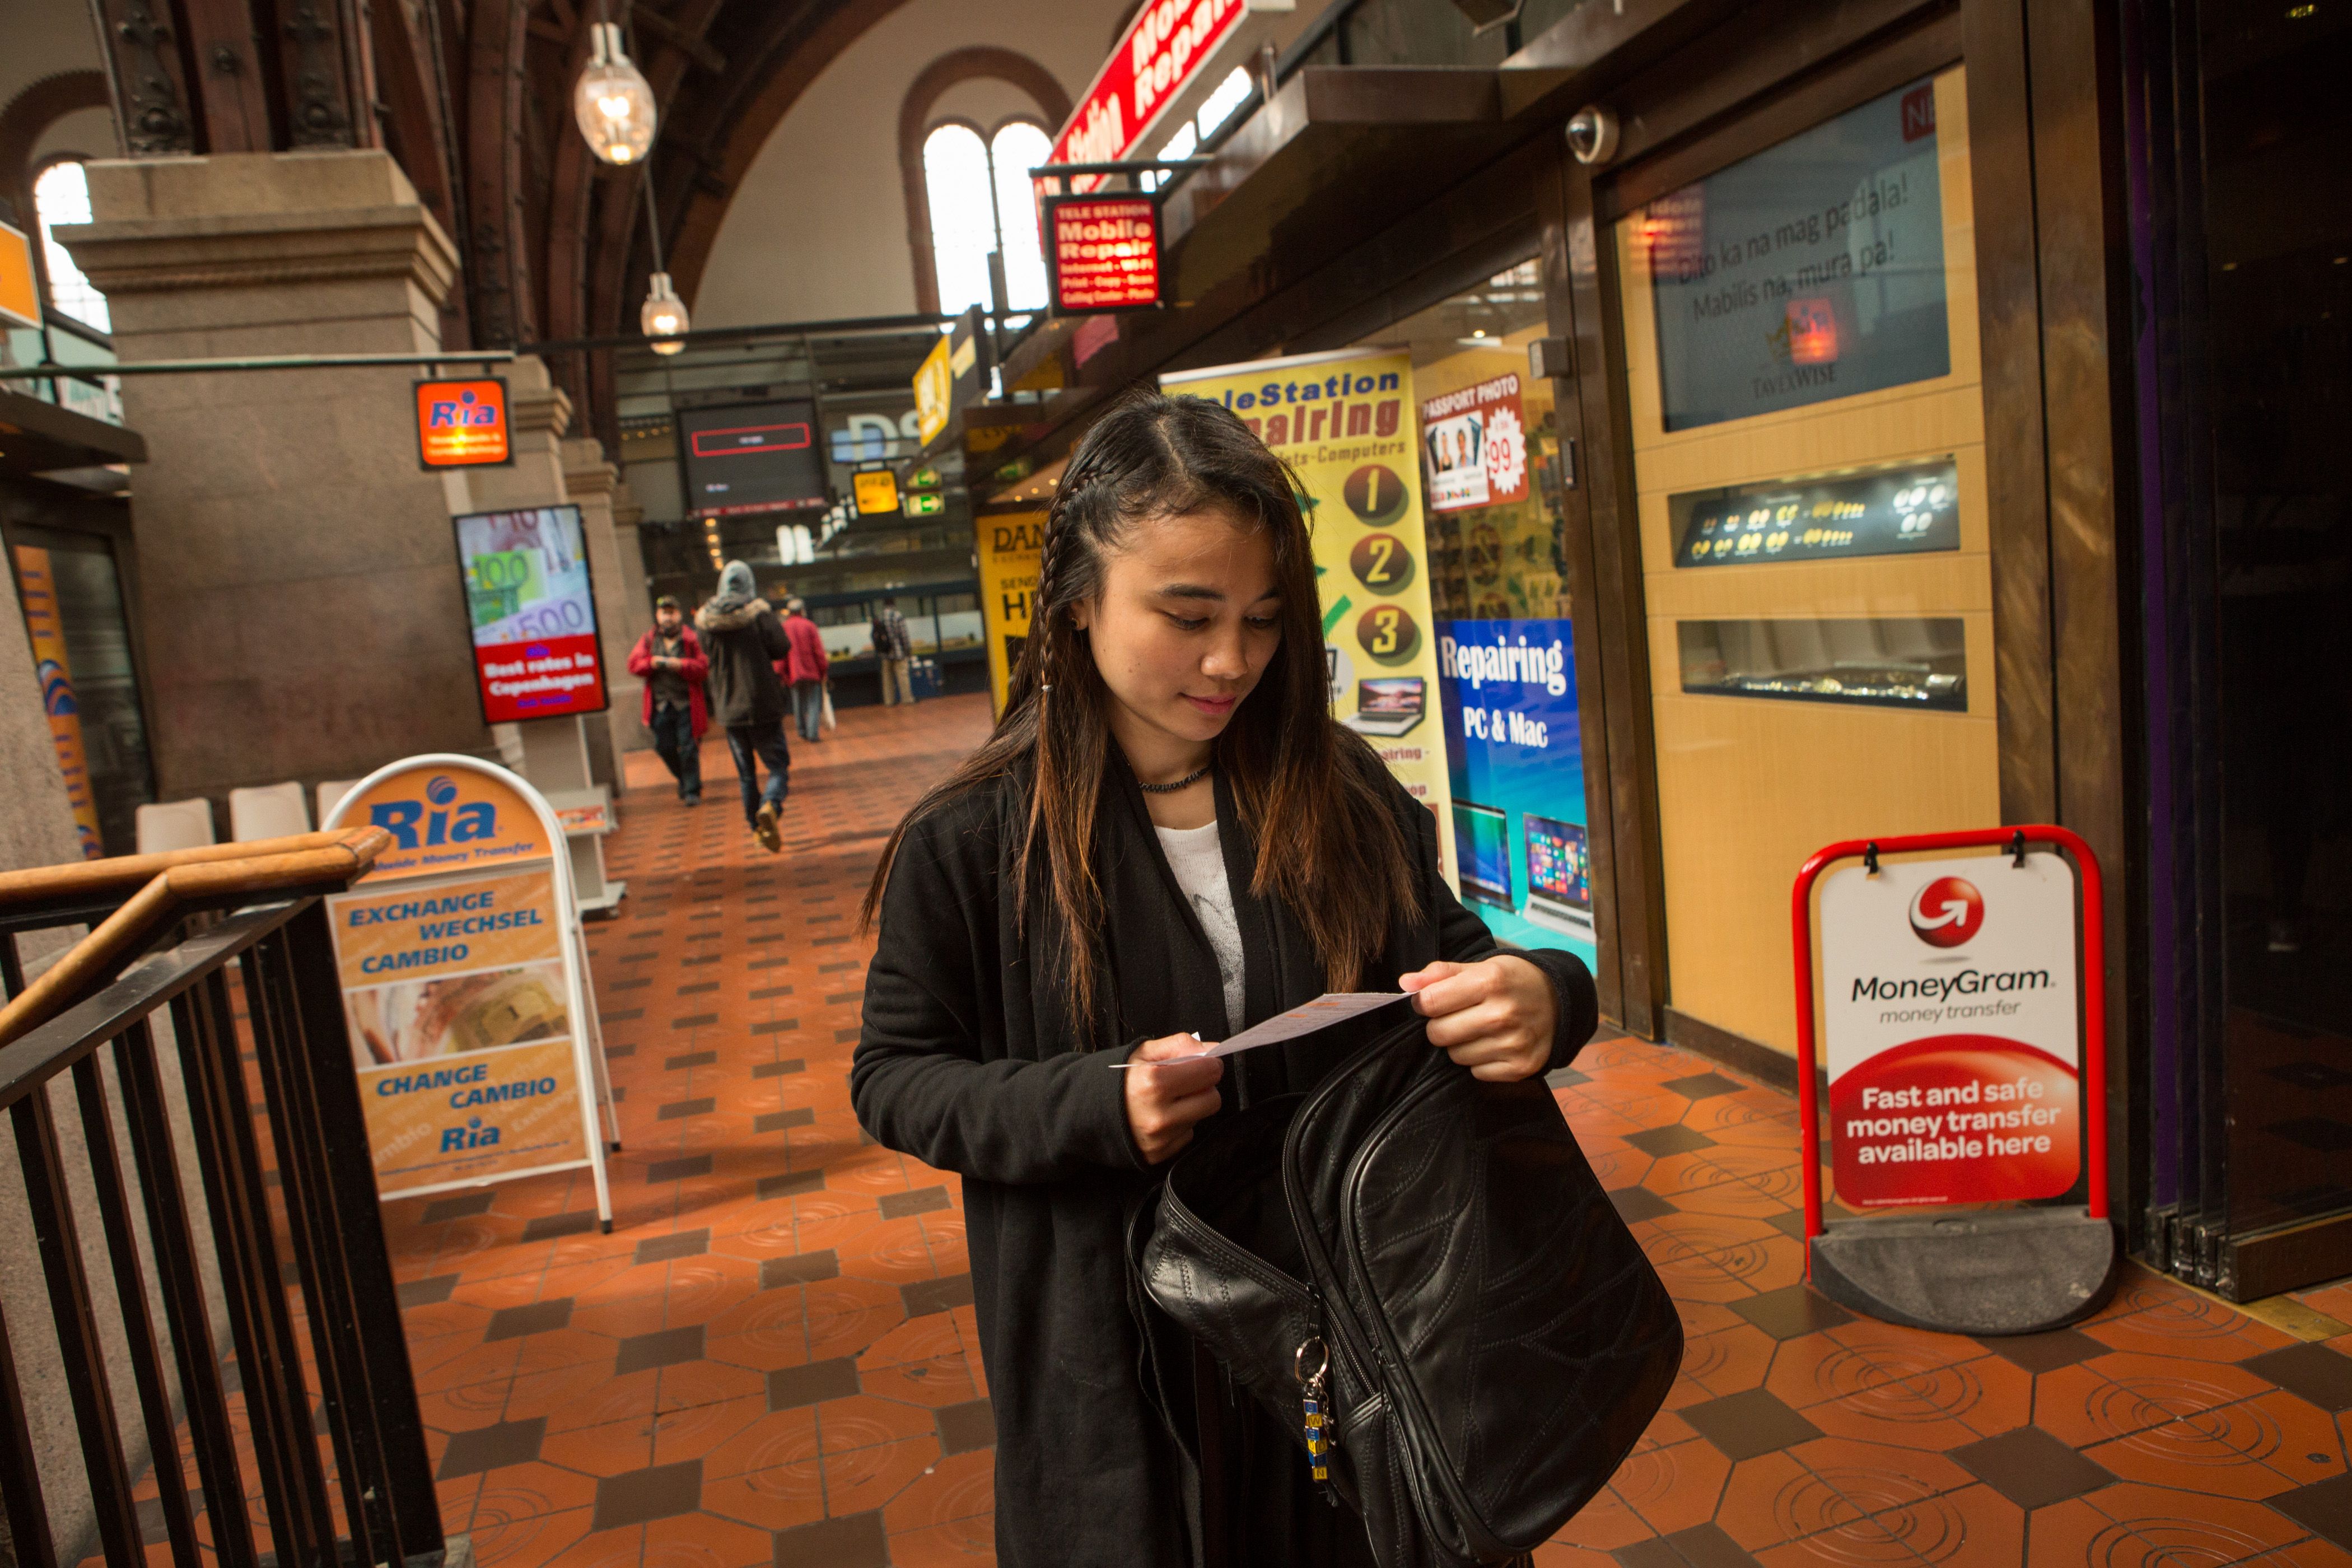 Au pair Lucila Espinosa Milay checks her receipt as she walks through a row of money transfer businesses after wiring part of her paycheck to siblings back in the Philippines, at Central Station in Copenhagen, Denmark, May 21, 2016. Milay pays the school fees for several of her eight siblings back home, sending money every 15 days. Remittances are a huge economic driver in the Philippines. Image by Allison Shelley. Philippines, 2016.